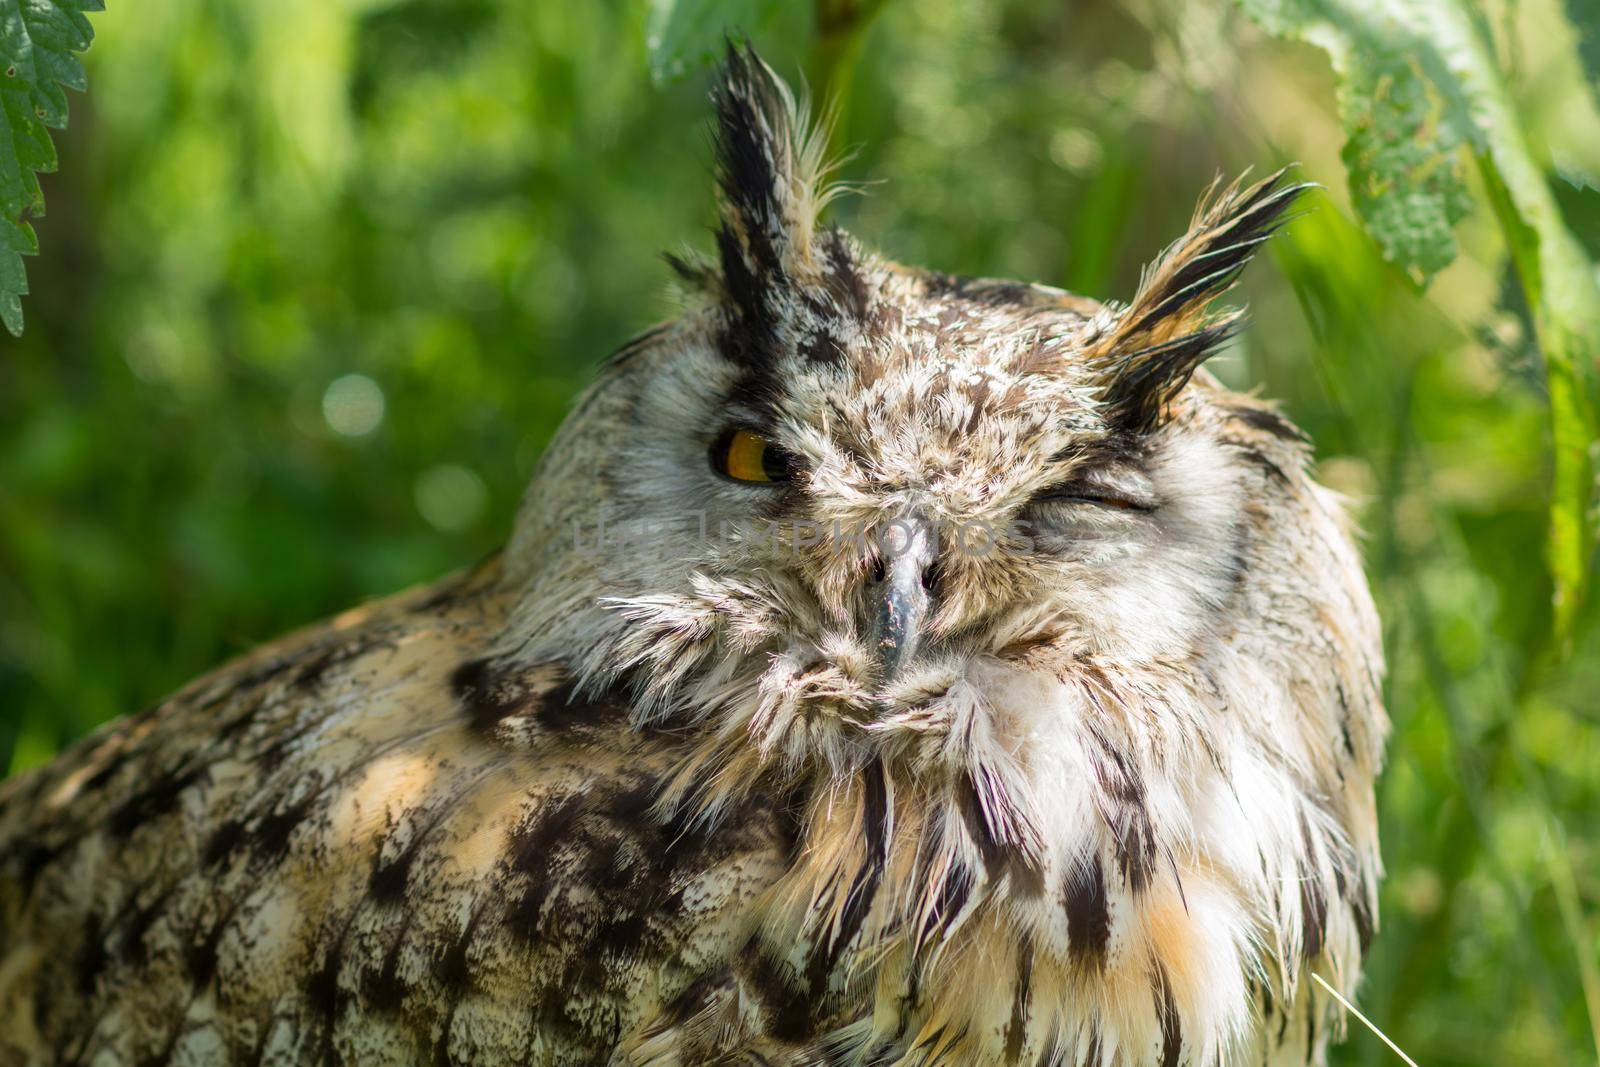 Portrait of a Siberian Eagle Owl ( Bubo Bubo Sibericus ) head with green background outdoors  by LeoniekvanderVliet